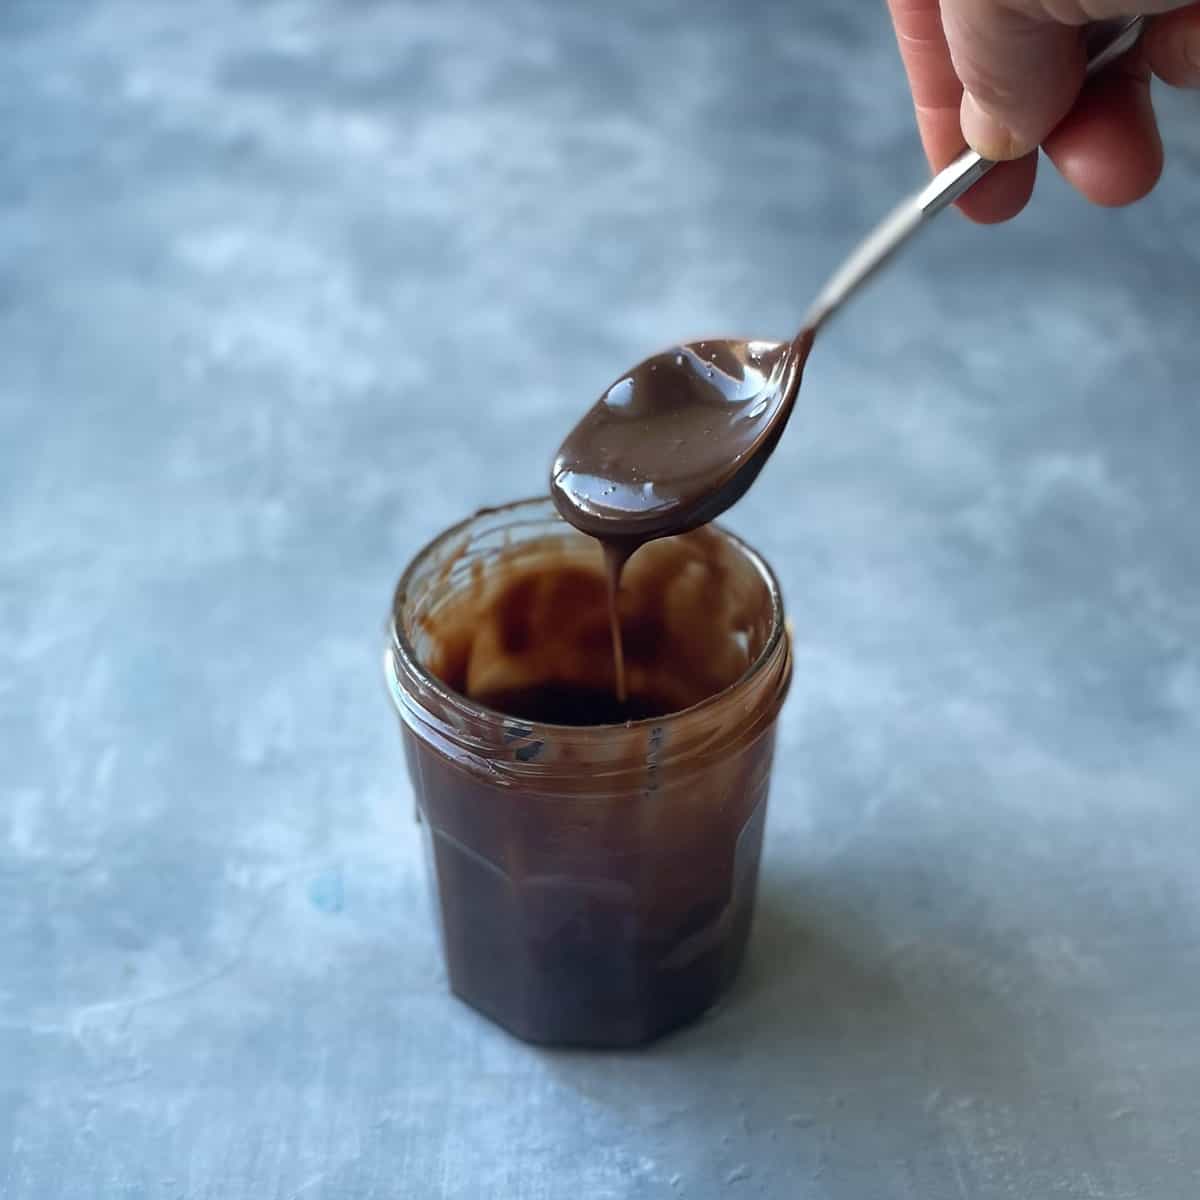 spoon dripping a dark brown sauce into a jam jar filled with the nutella ganache.